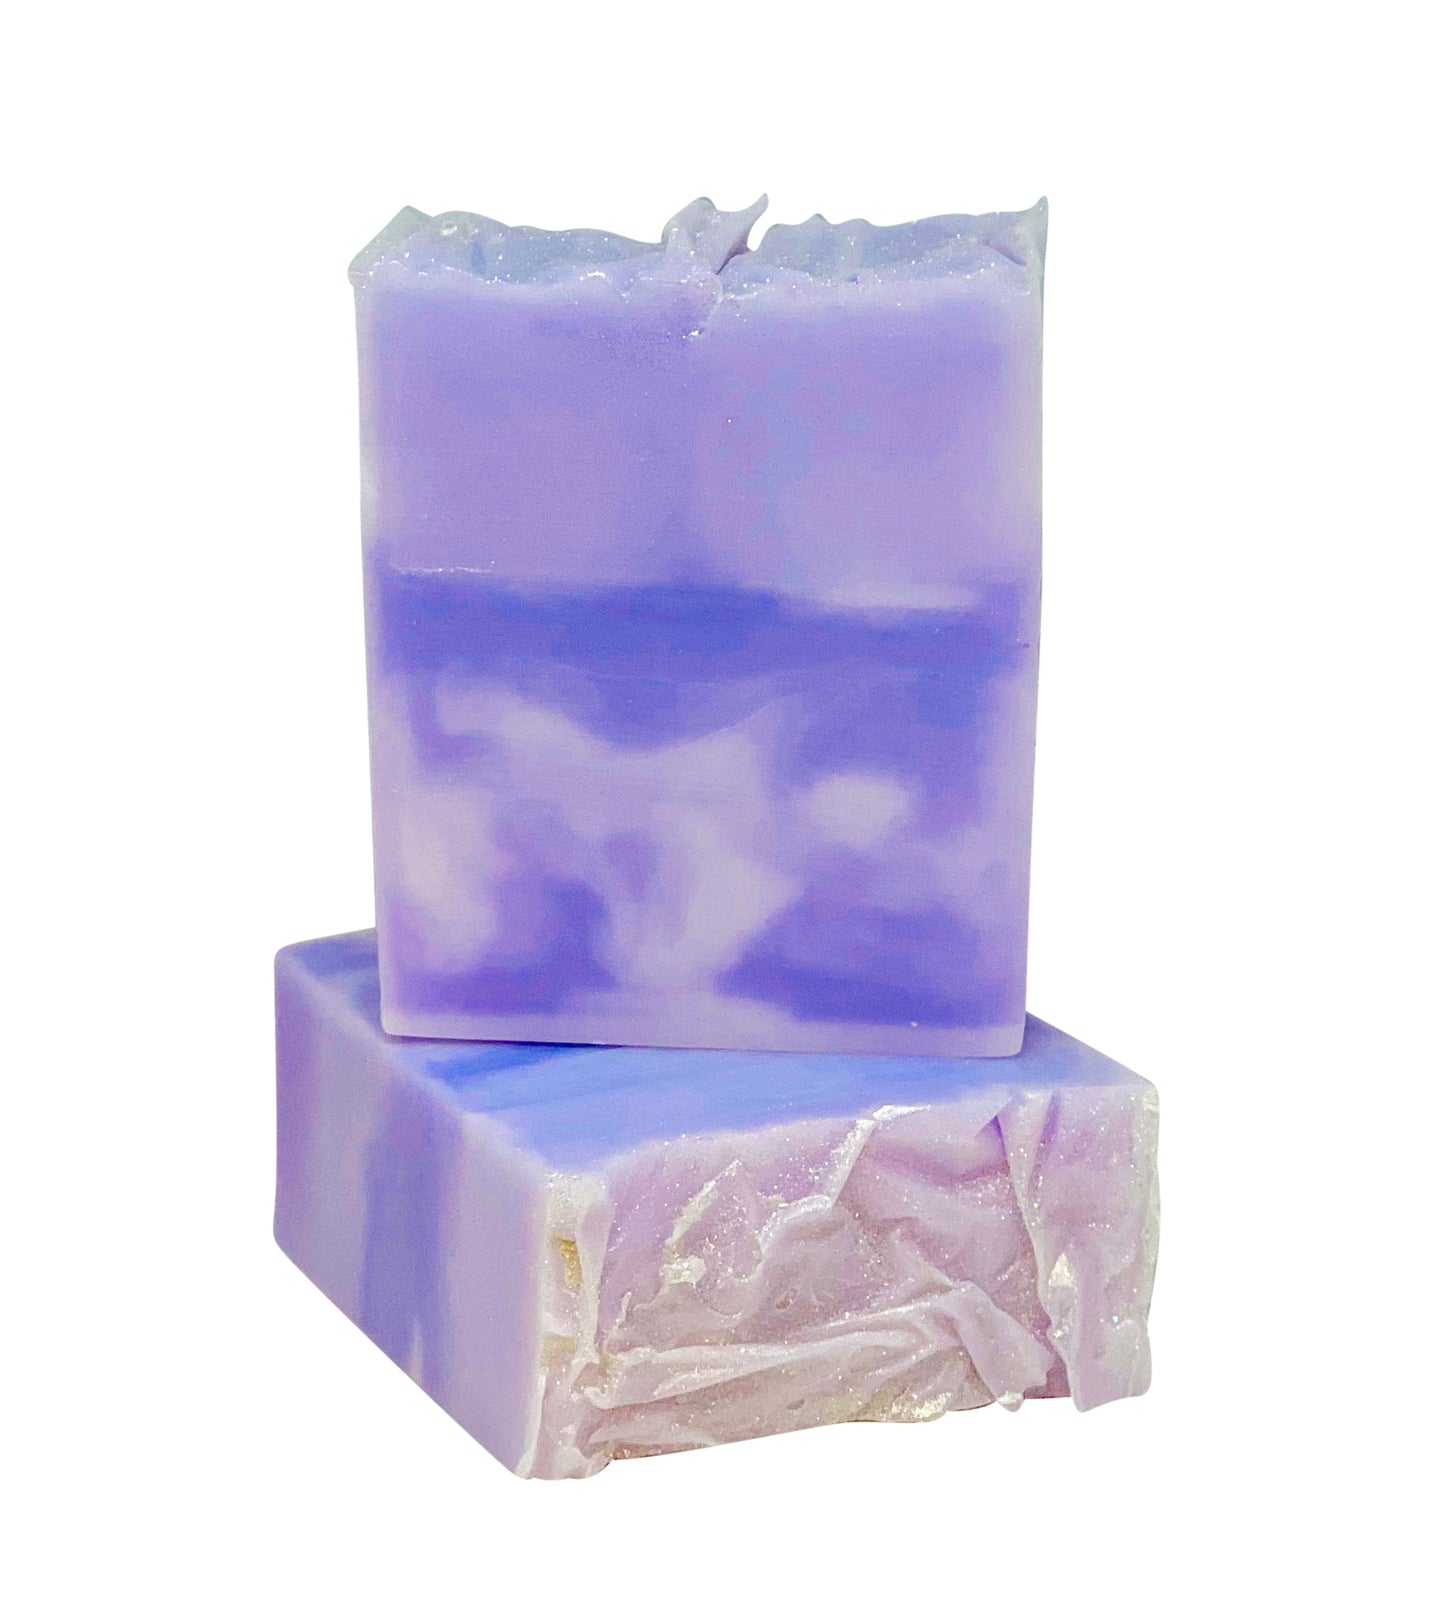 Beauty Sleep Lavender Soap Bar-French Lavender Scent